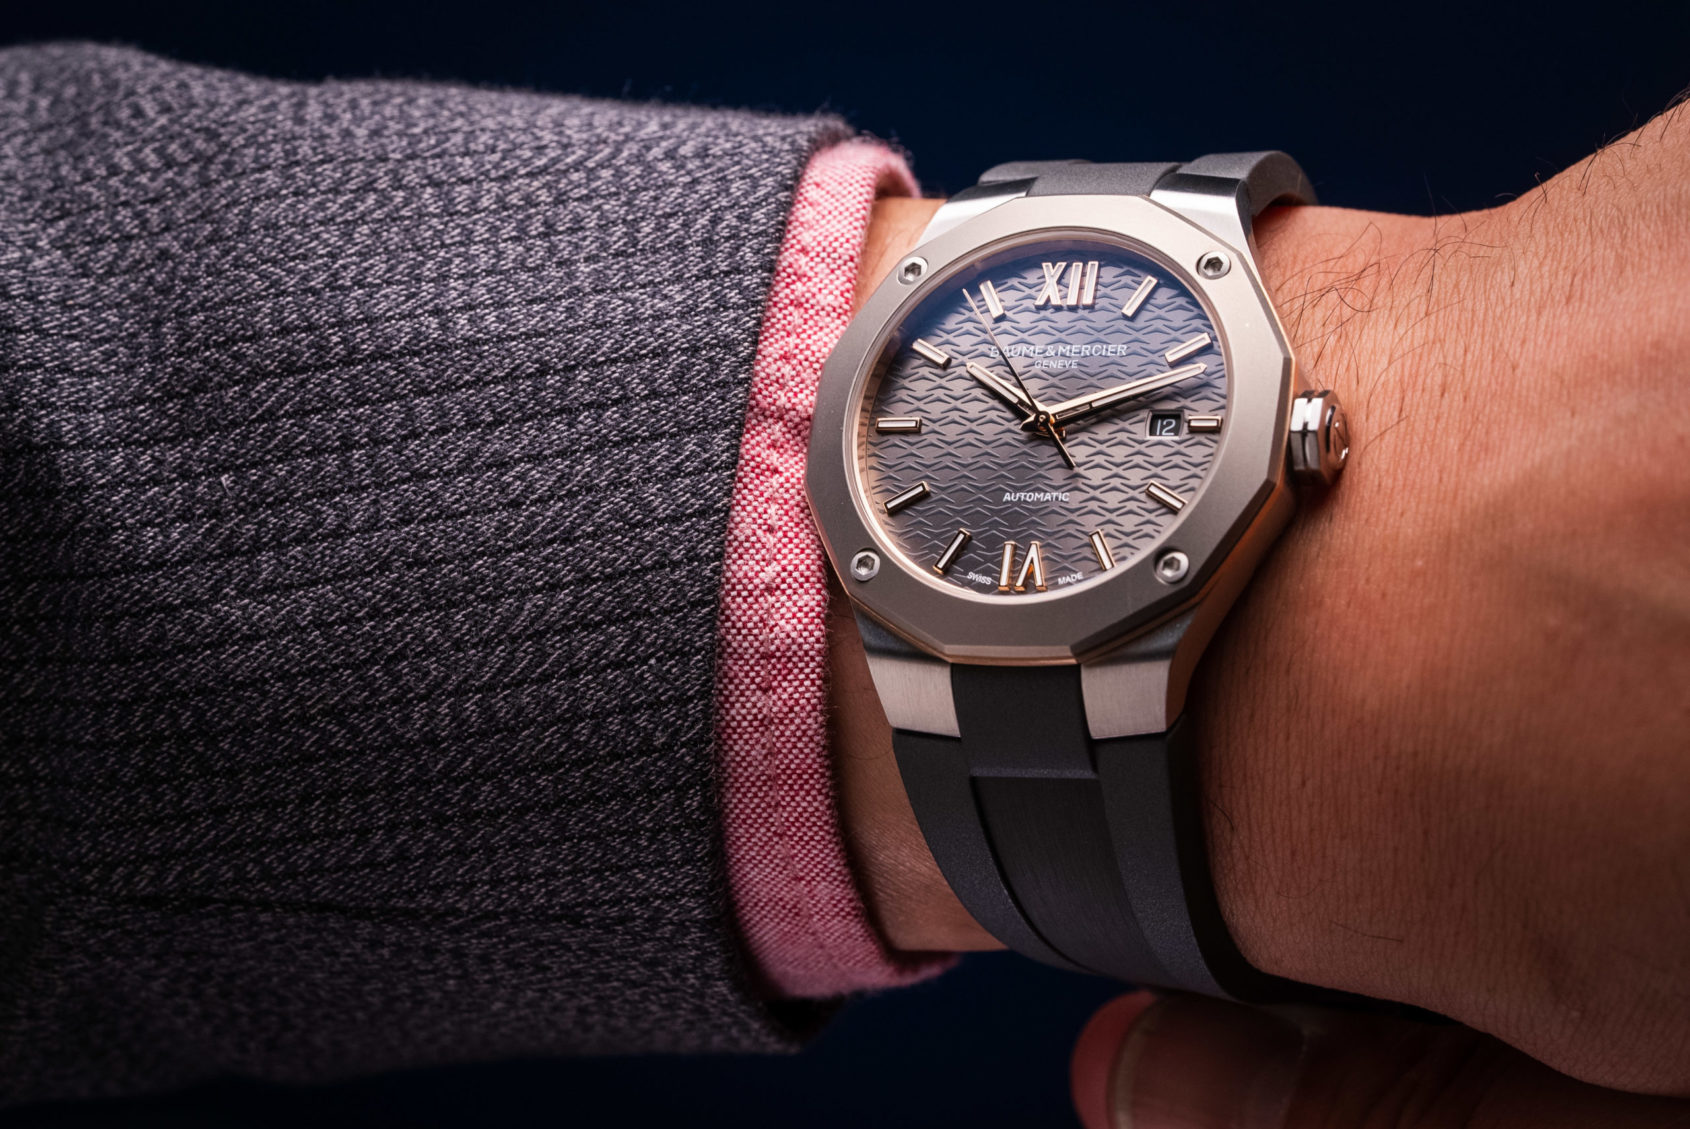 Why you should pay more attention to the Baume & Mercier Riviera